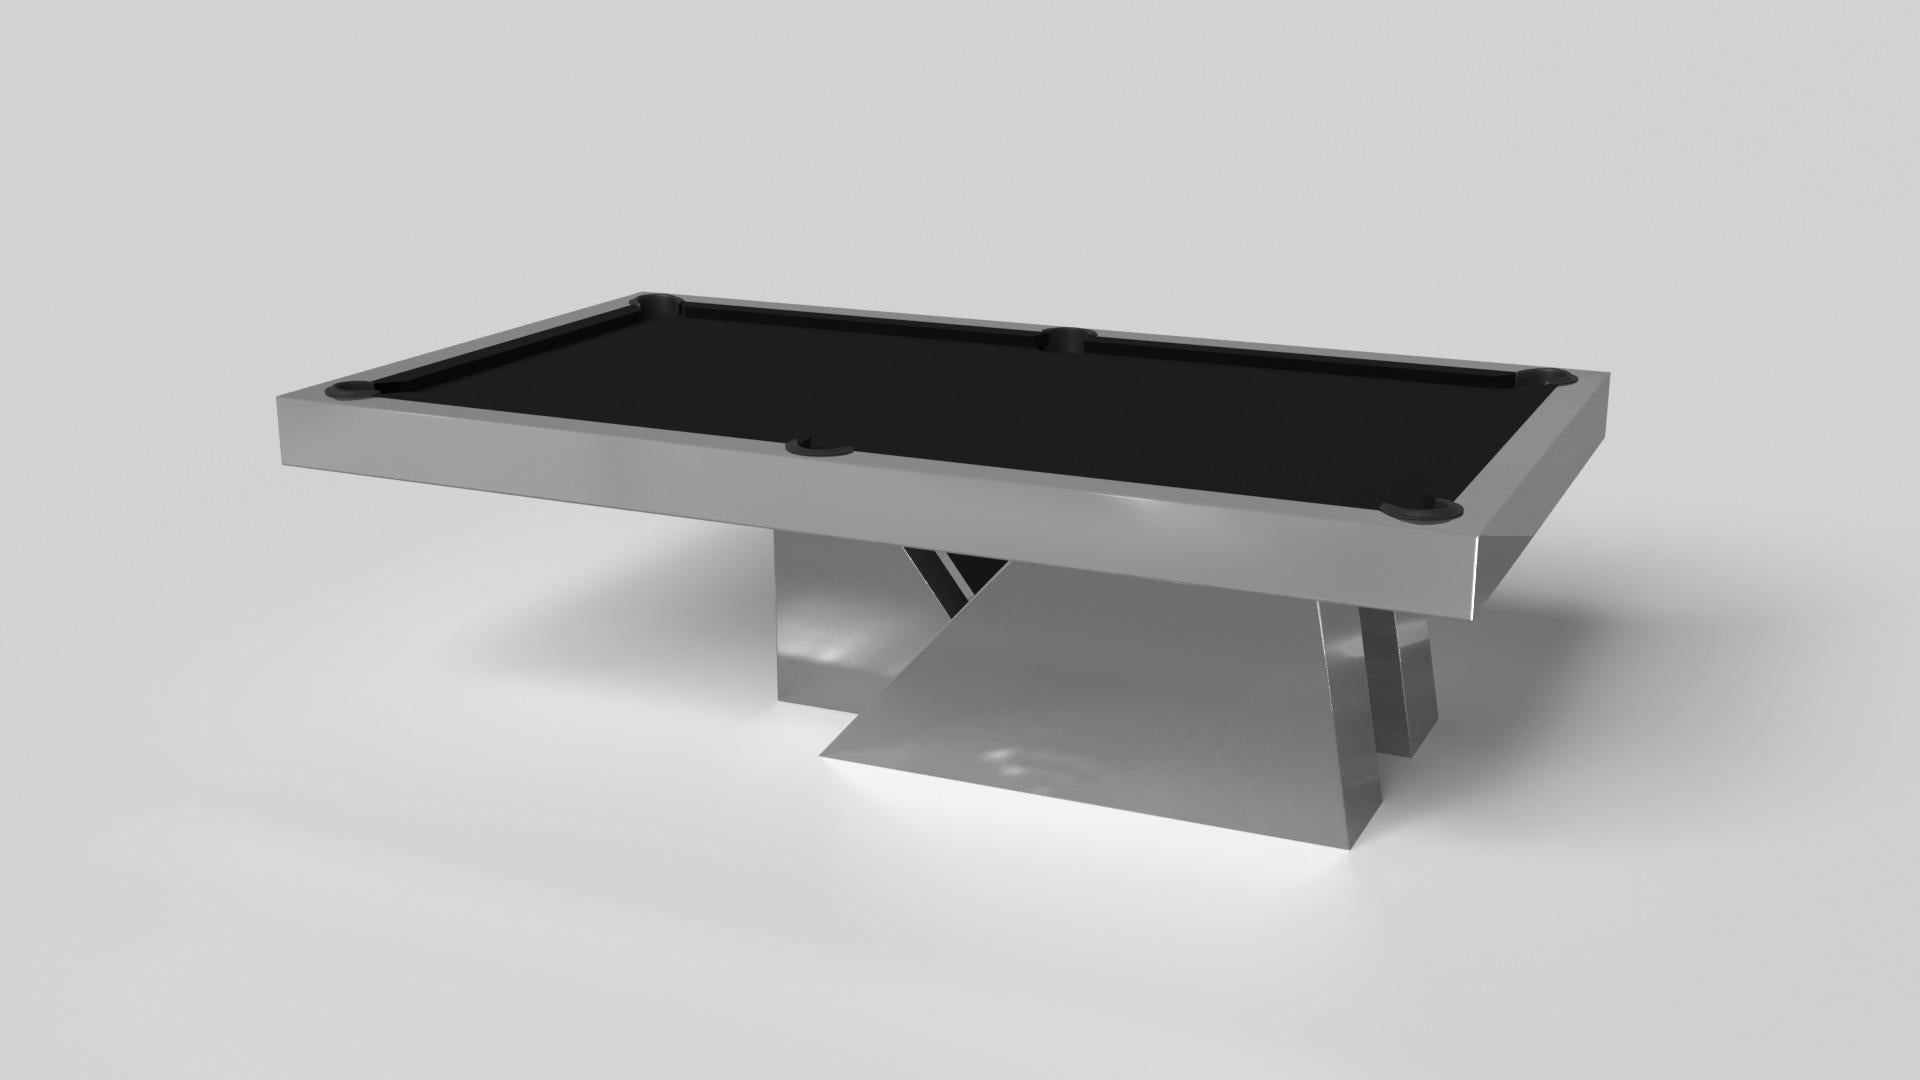 An asymmetric base creates a free-floating silhouette, making the Stilt pool table in chrome with walnut a compelling, contemporary addition to the modern home. Crafted from durable metal with solid walnut wood accents, this luxury handcrafted game